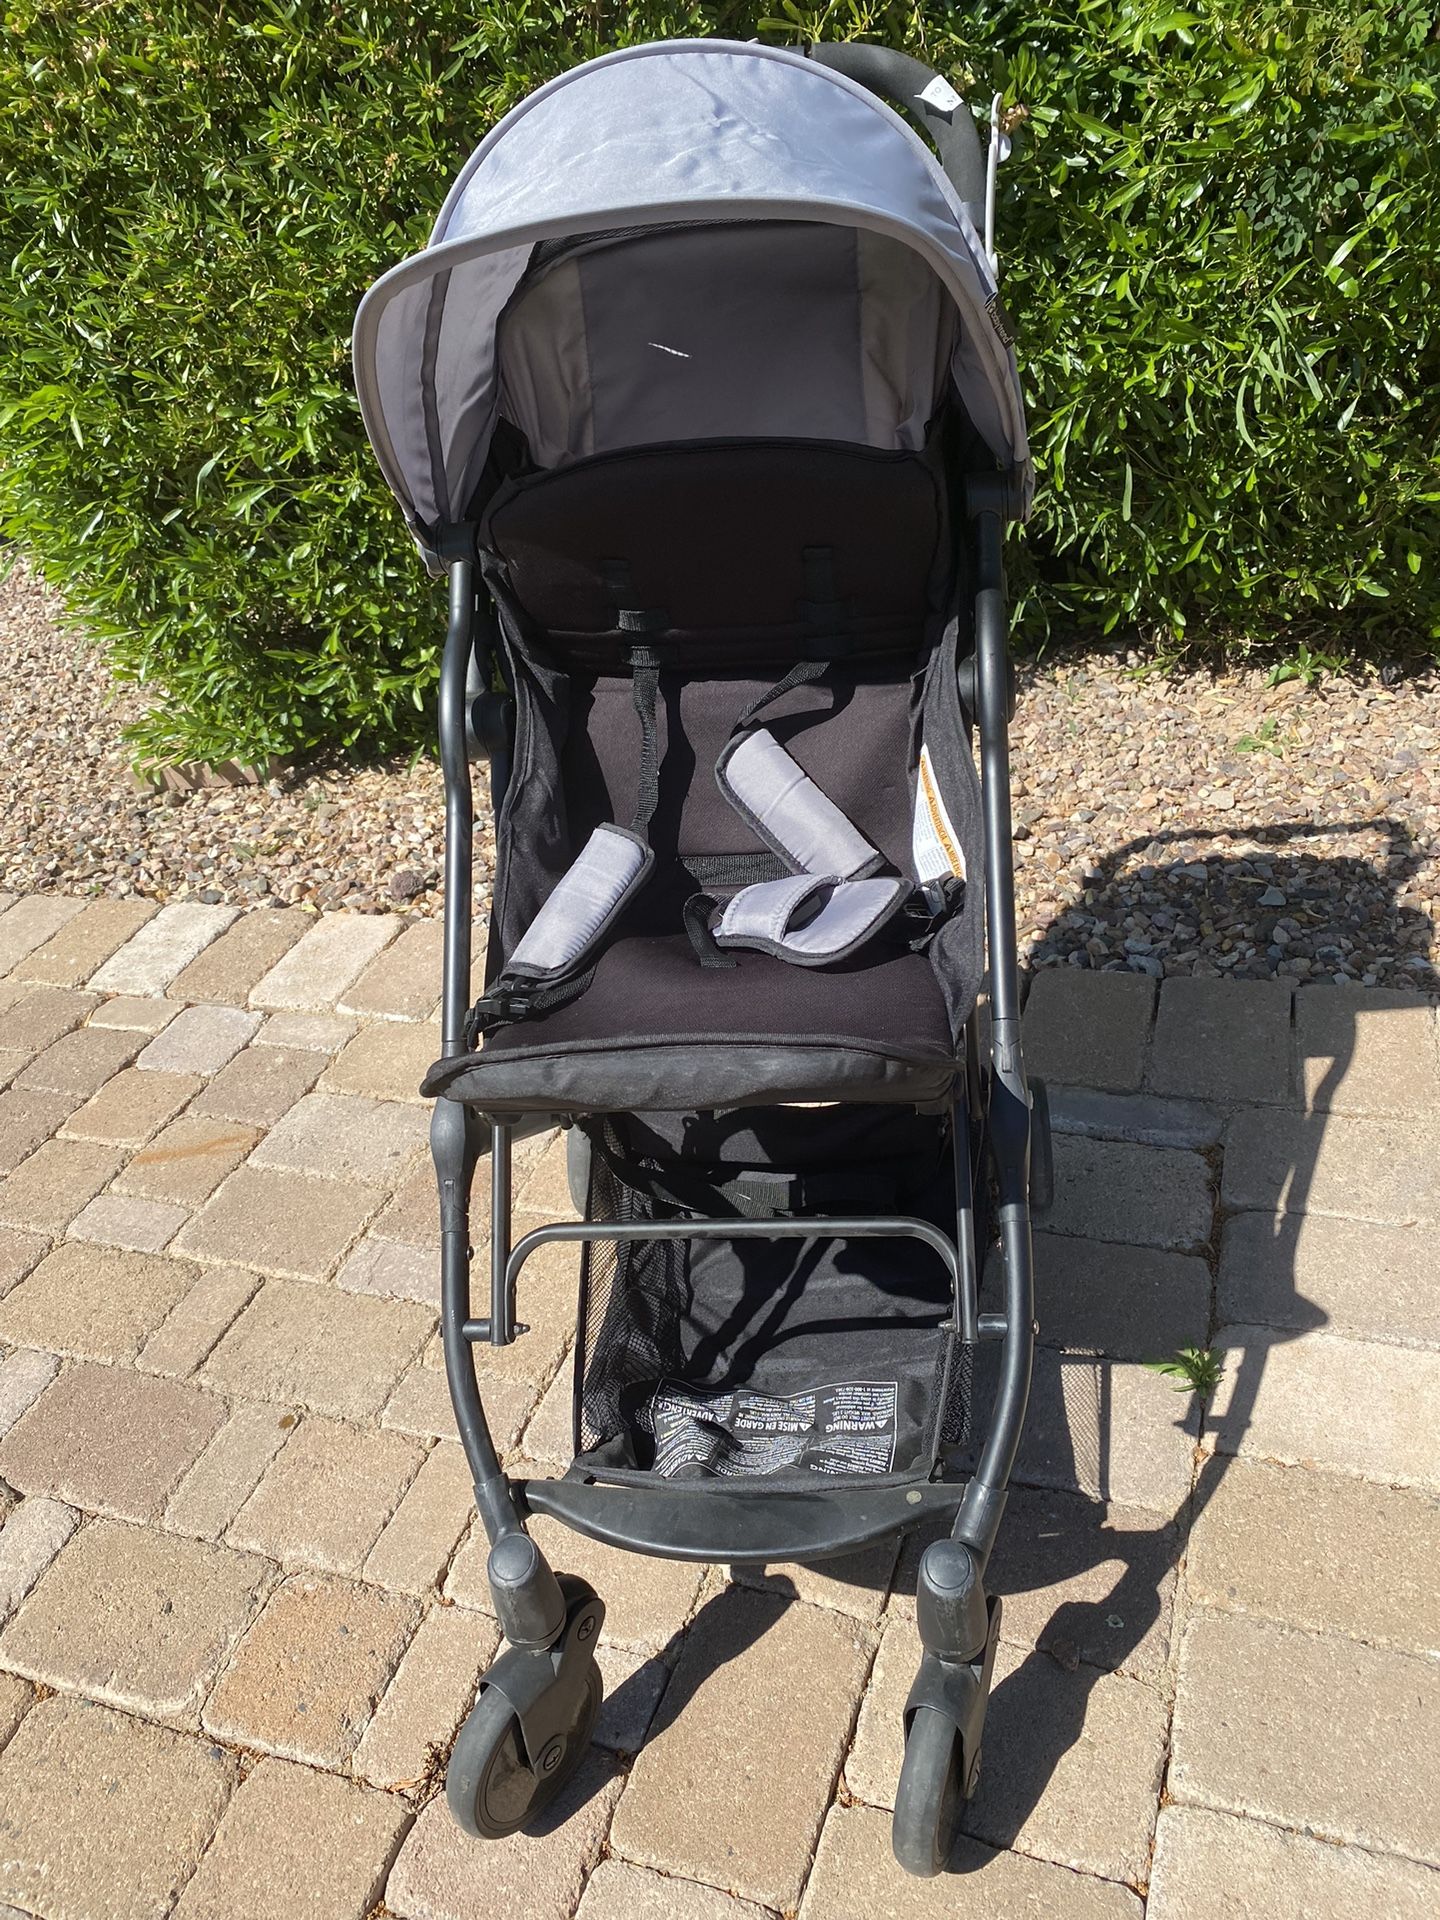 Used-Baby Trend Travel Tot Compact Stroller,